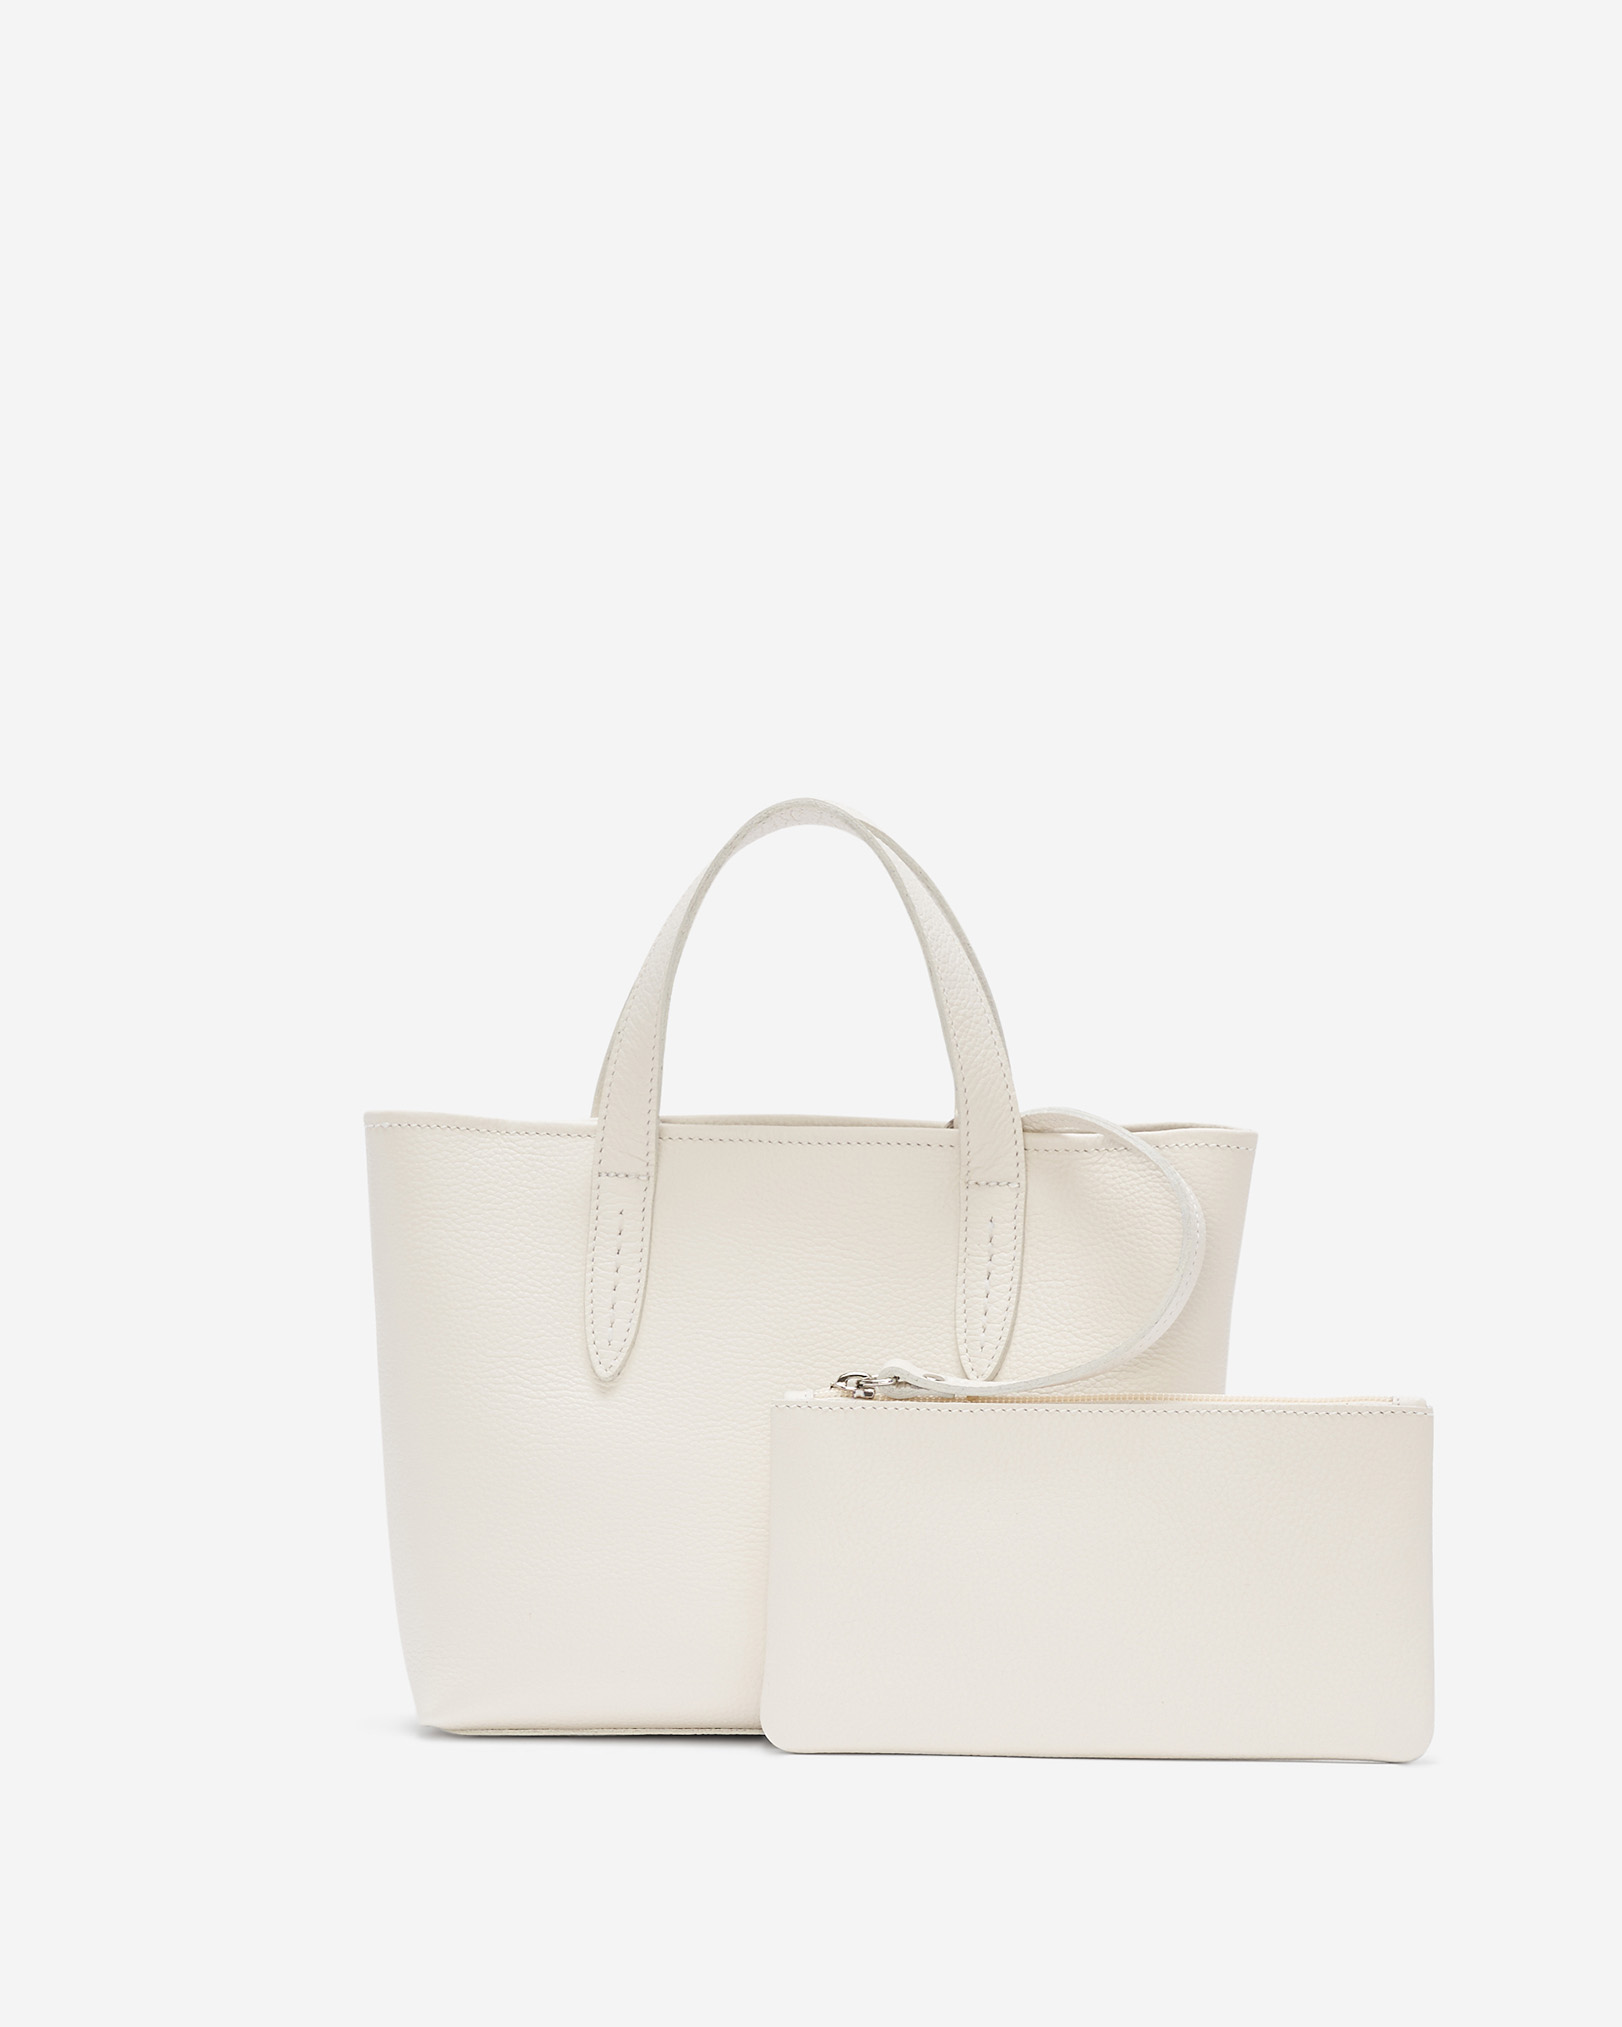 Roots Carryall Crossbody in Ivory/Camel